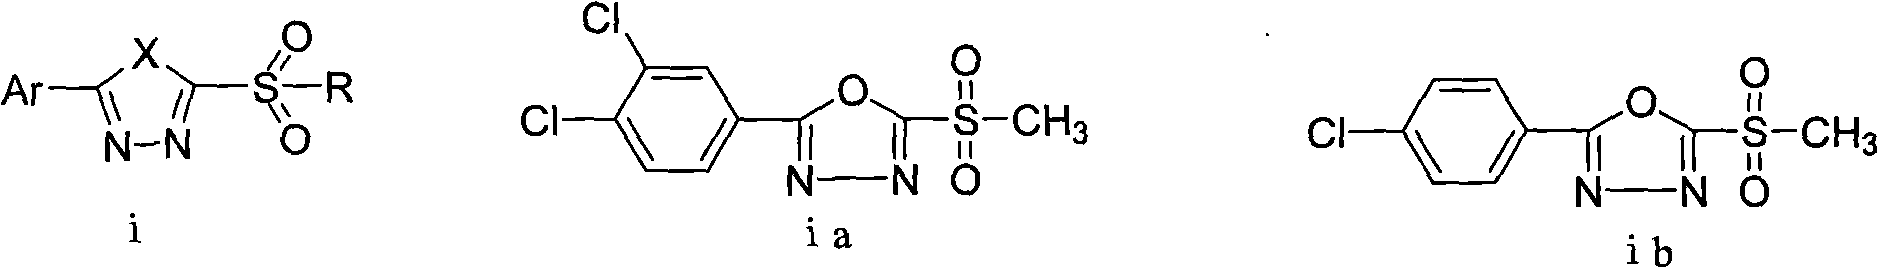 2-substituent-5-(2,4-dichlorophenyl)-1,3,4-oxadiazole derivative, synthetic method and application thereof